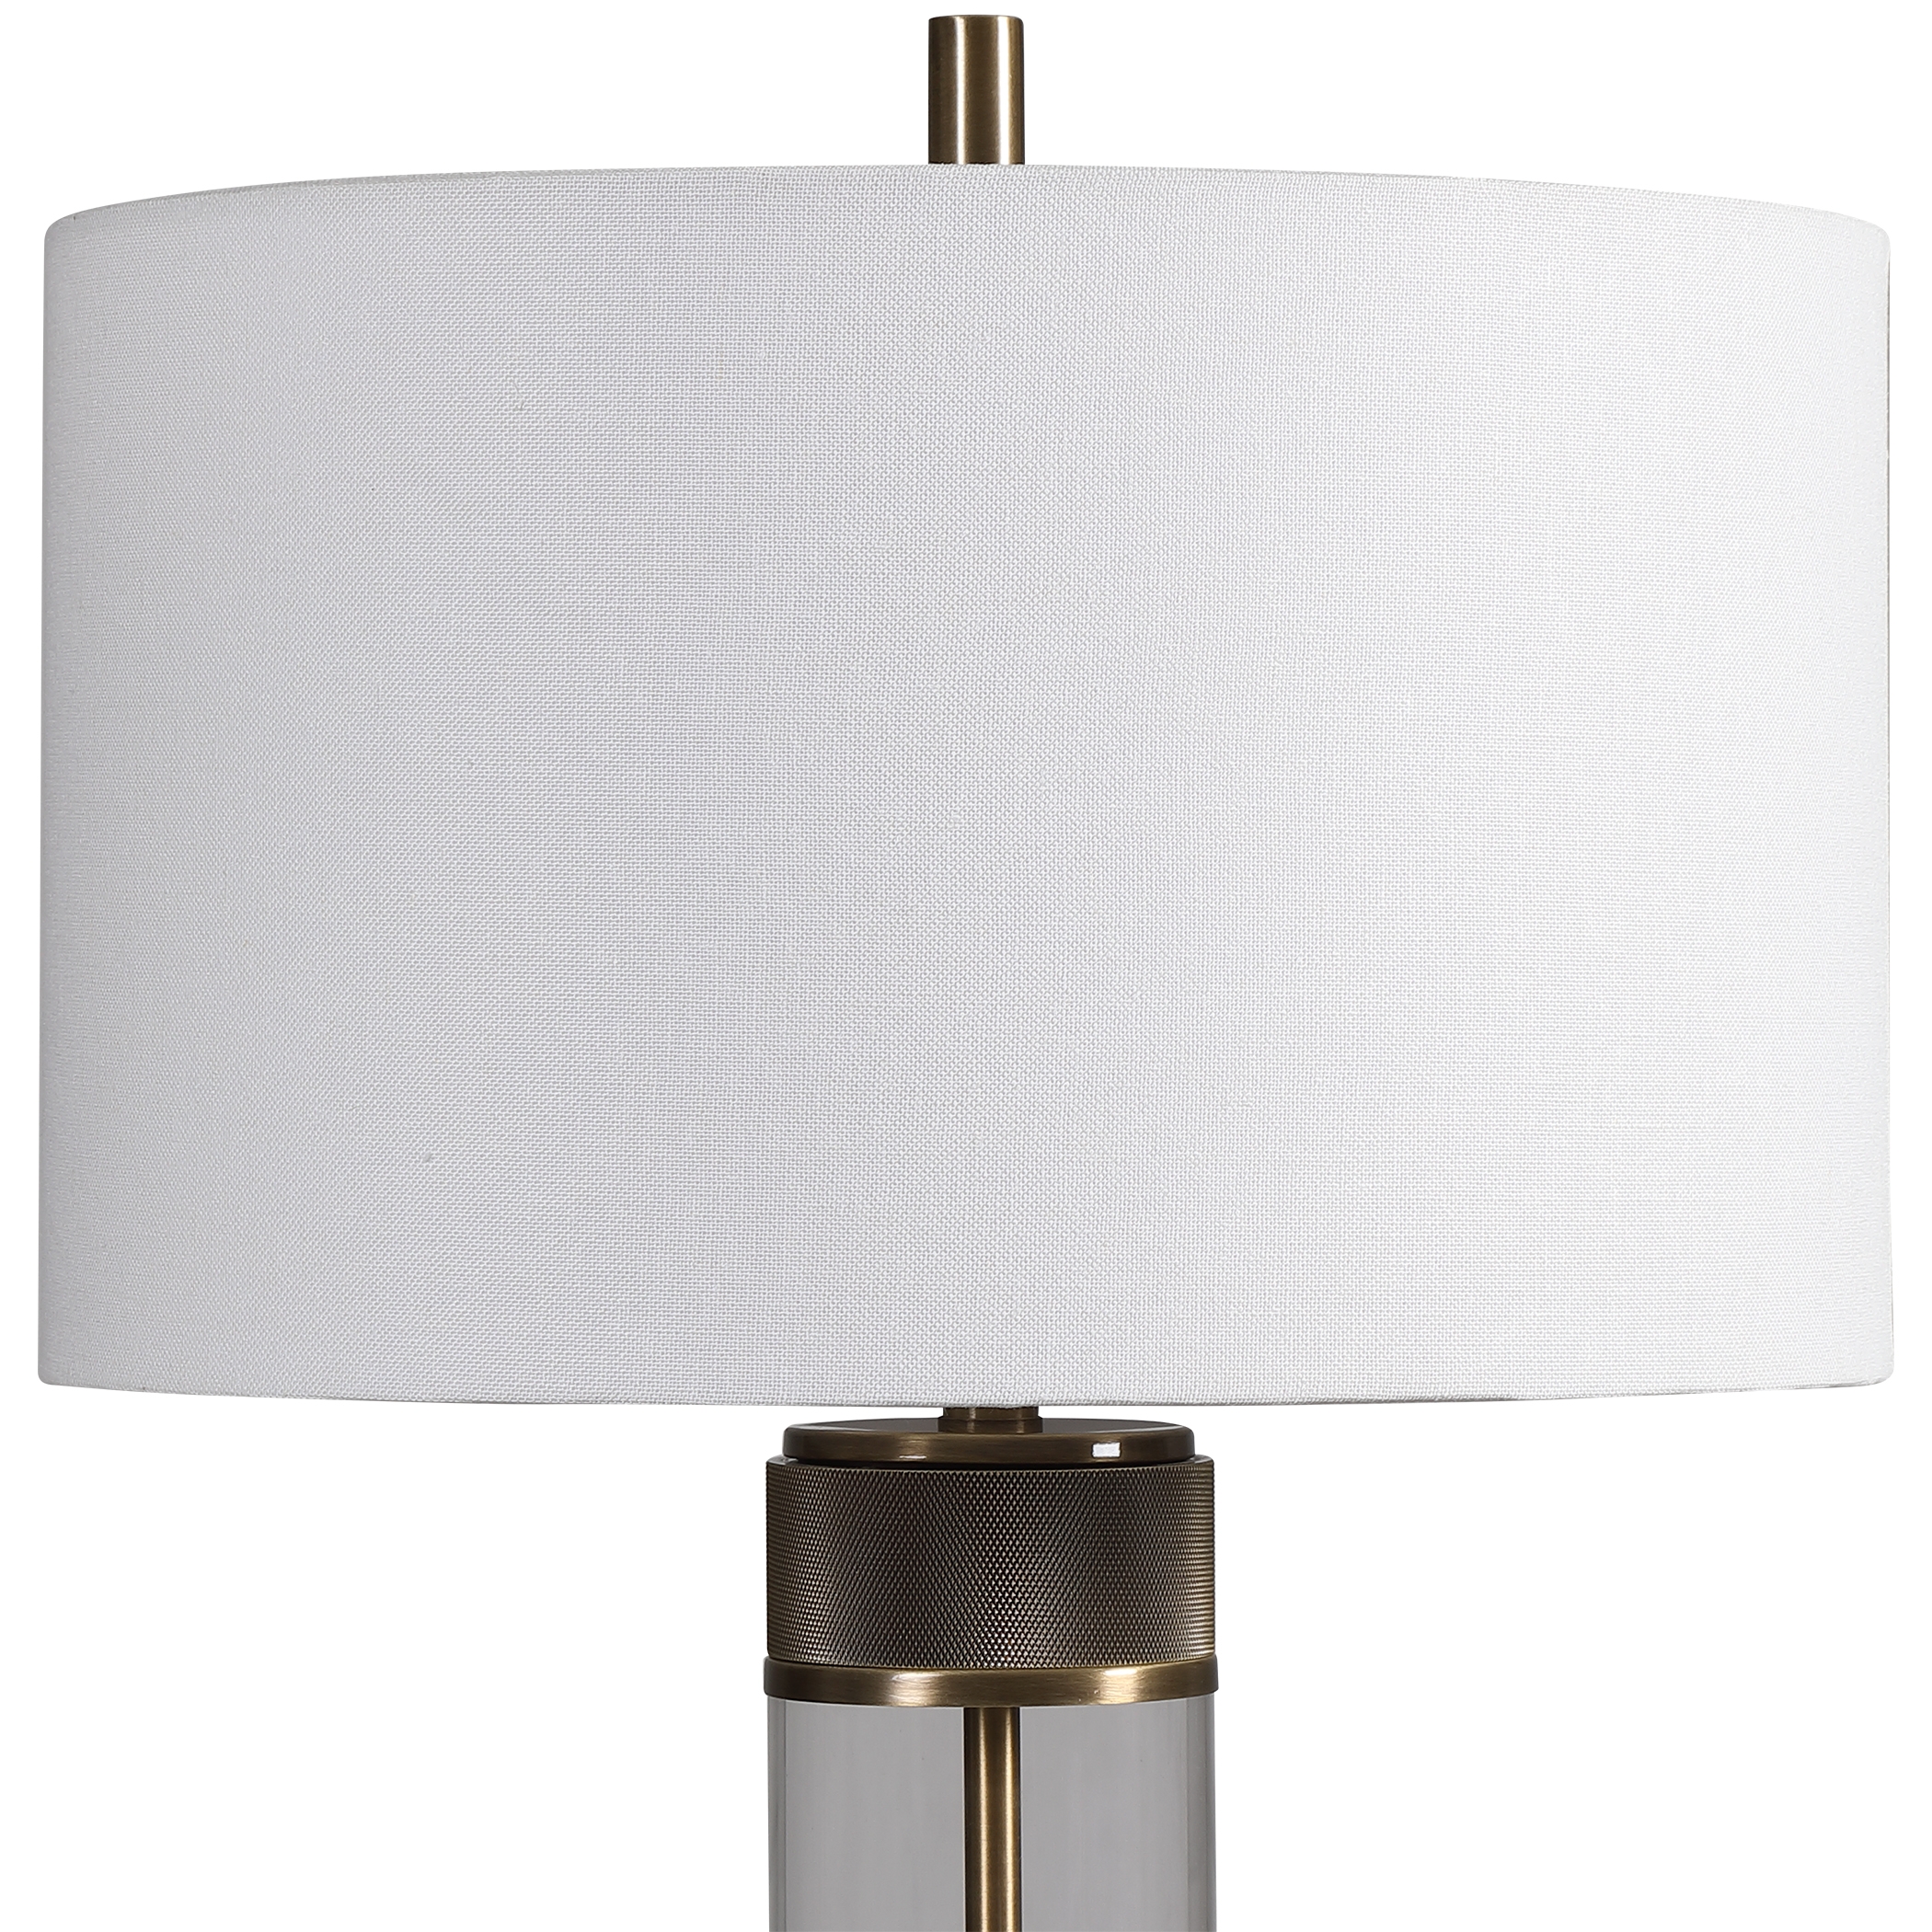 Anmer Industrial Table Lamp - Image 4